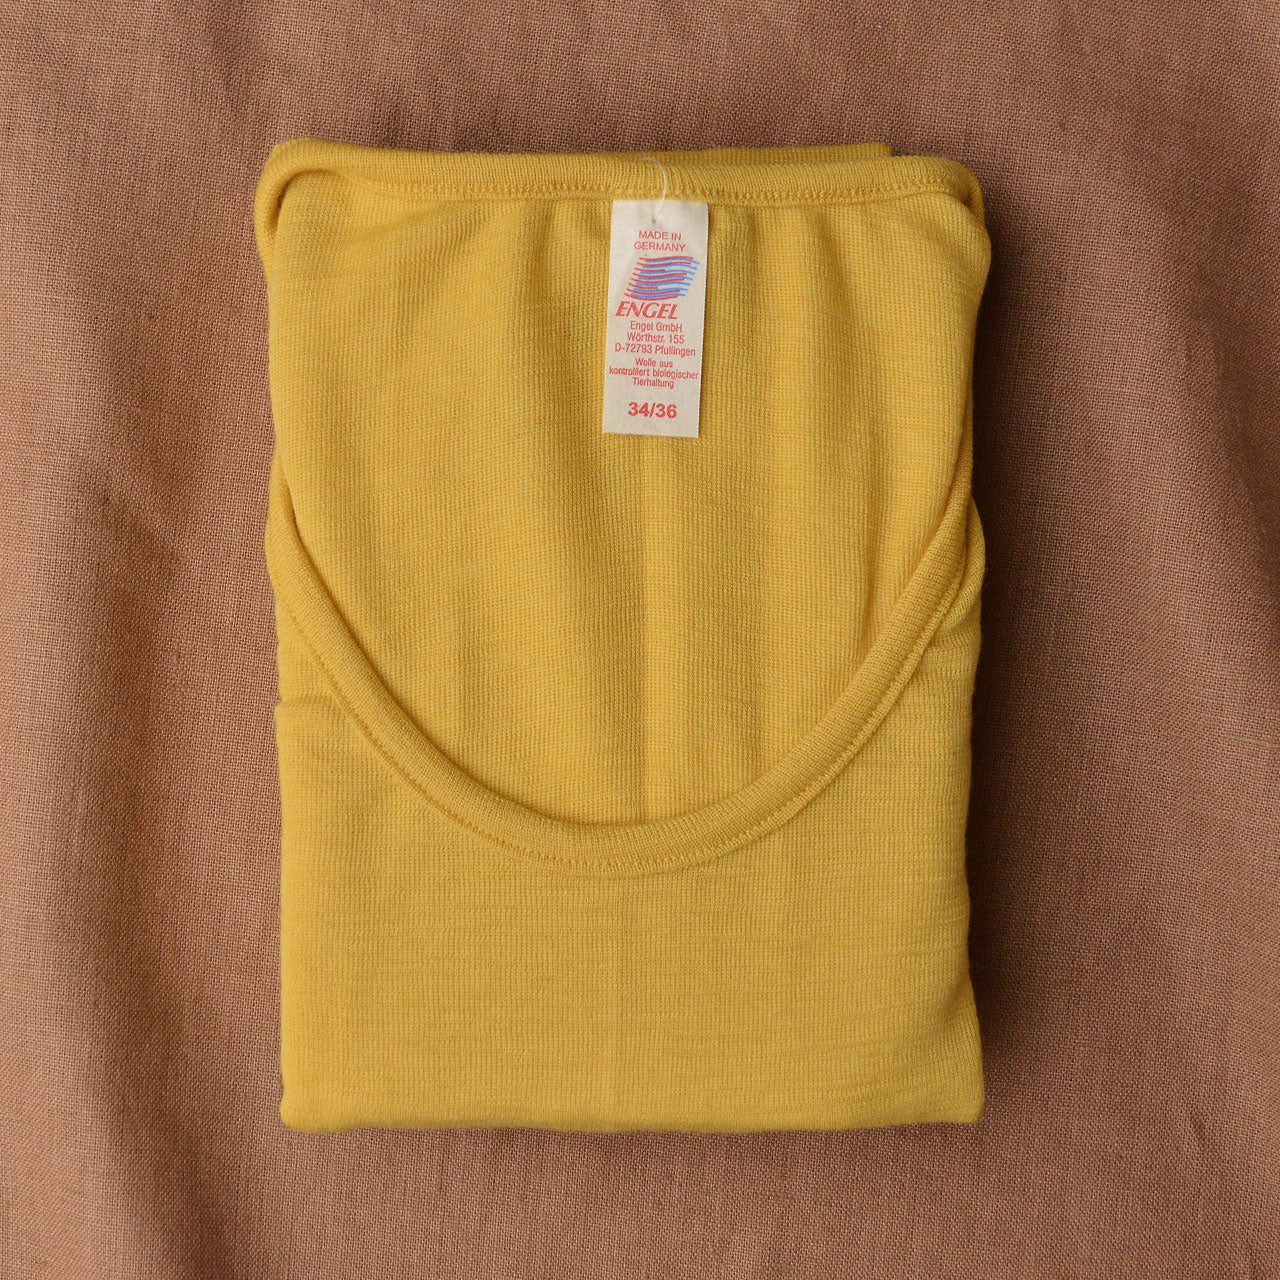 Women's Long Sleeved Top - 100% Organic Merino - Butter (XS-L) *Limited Edition